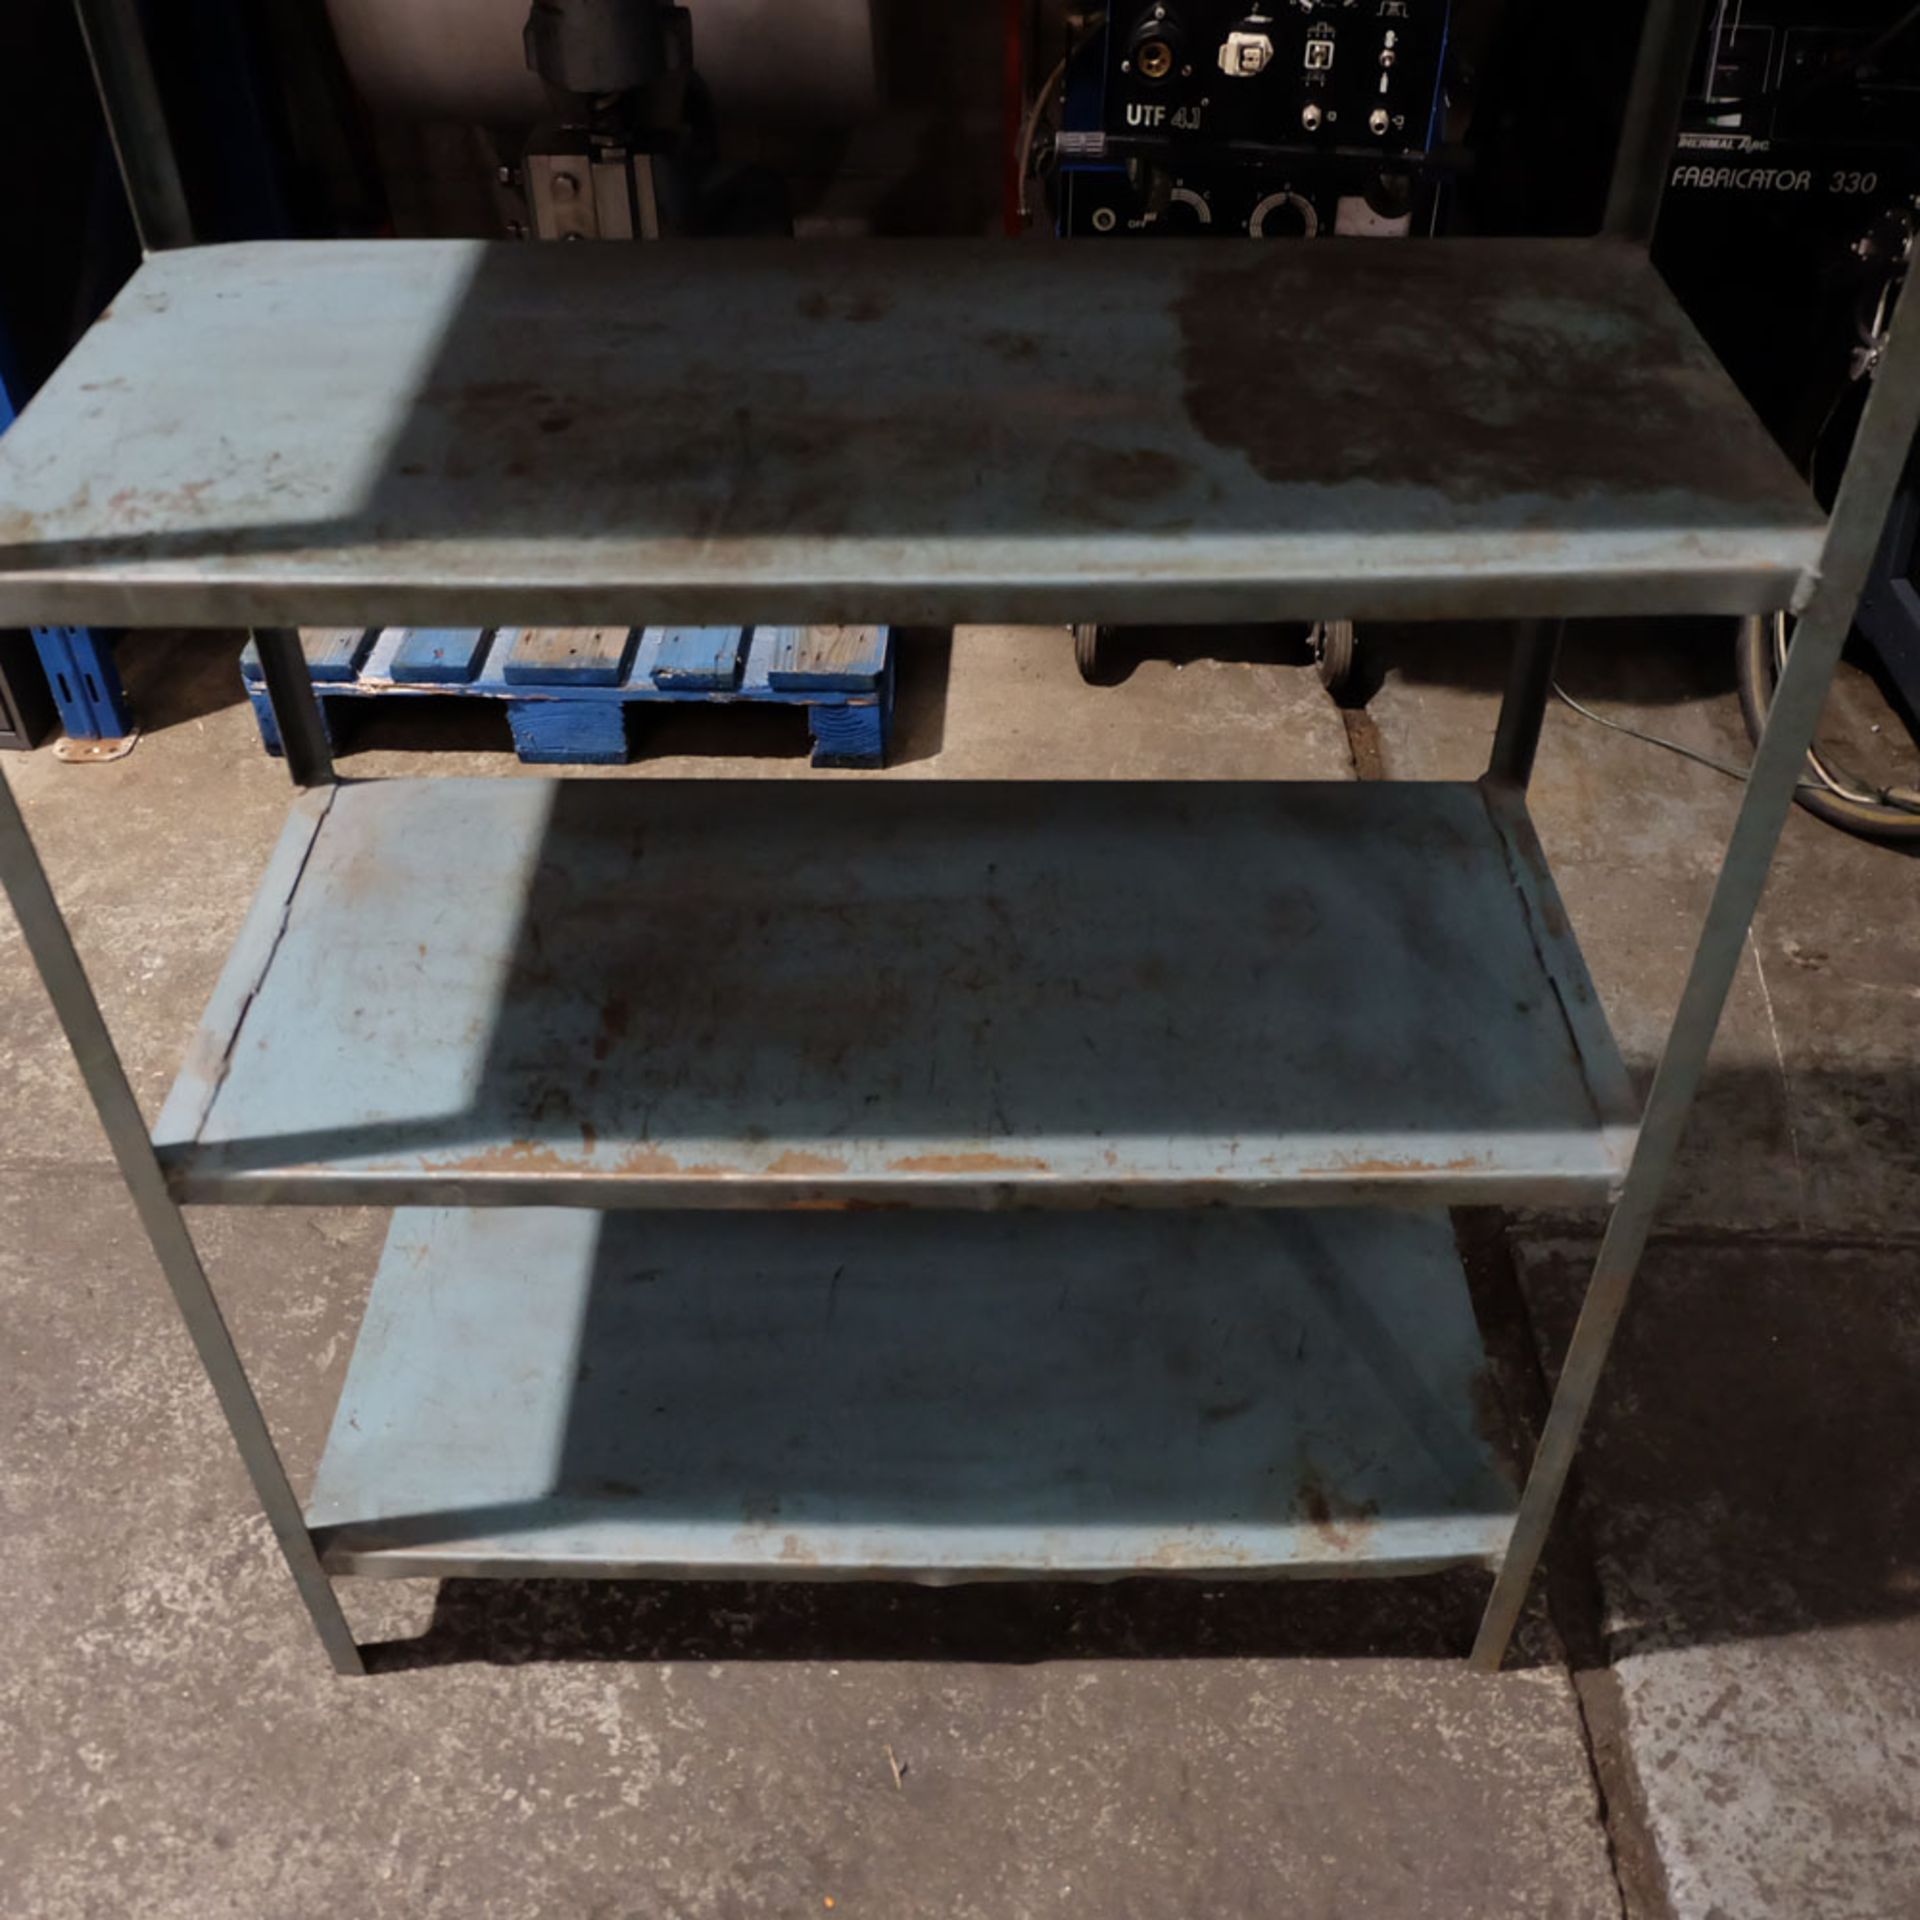 Steel Shelves. Shelf Size Approx 36" x 16". Overall Height 72". - Image 5 of 5